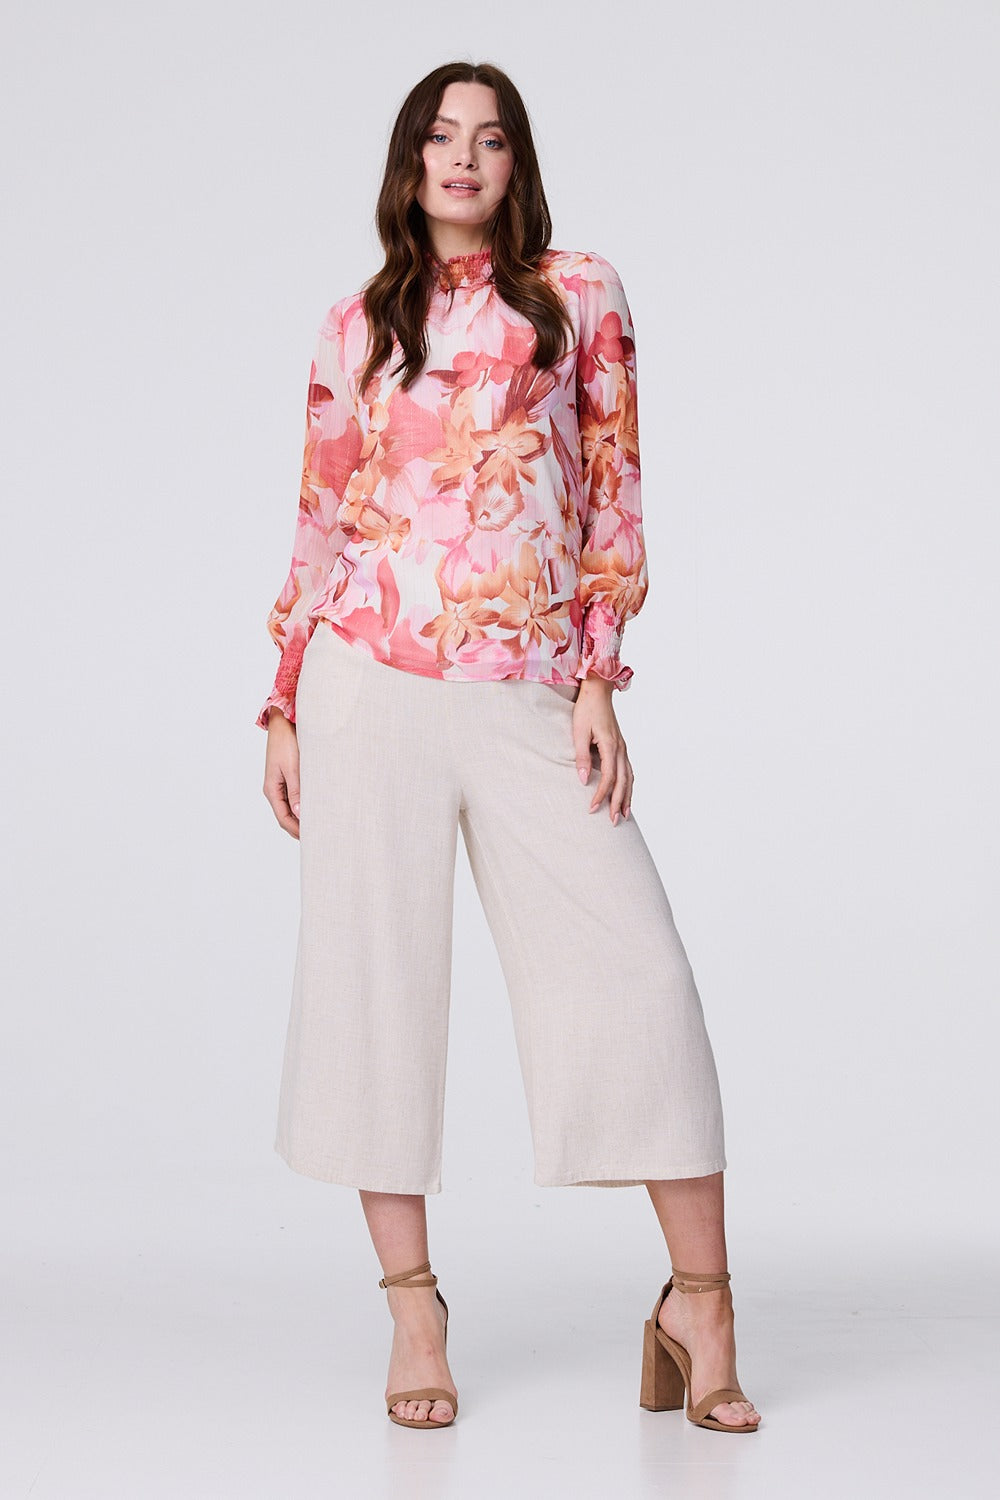 Pink | Floral Shirred High Neck Blouse : Model is 5'9"/175 cm and wears UK8/EU36/US4/AUS8